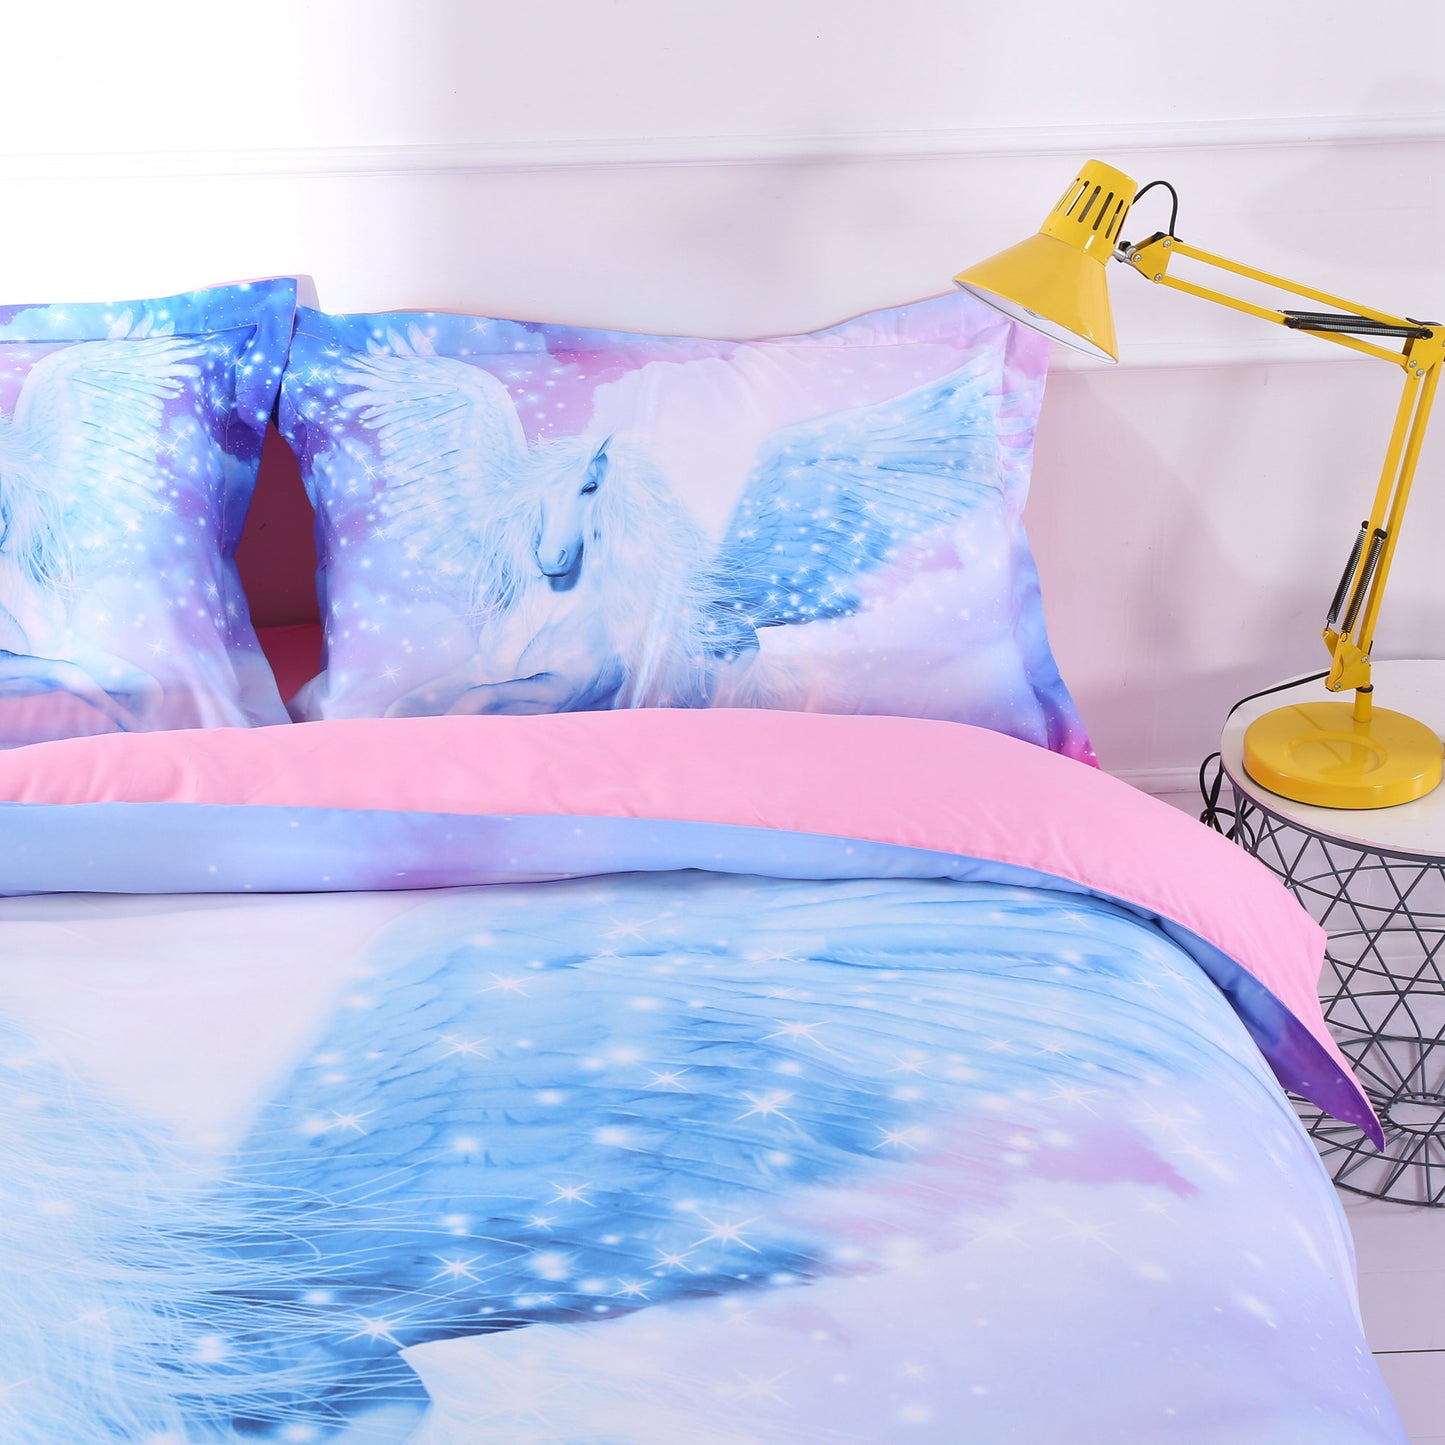 Unicorn Bedding White Unicorn with Wings Printed 4-Piece Duvet Cover Set with Flat Sheet Pillowcases